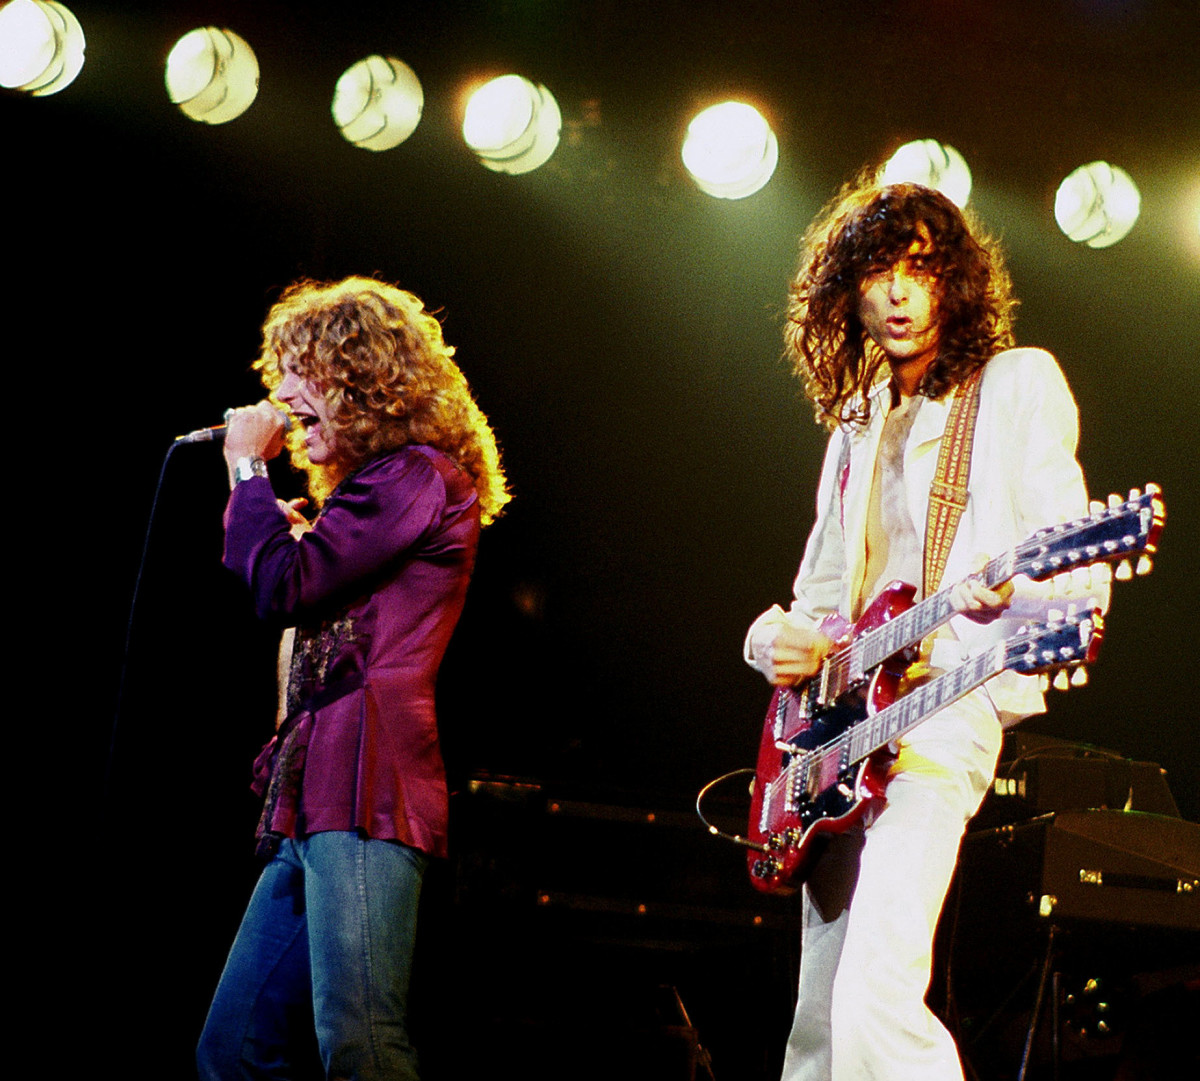 The Story Behind the Song “Stairway to Heaven” by Led Zeppelin